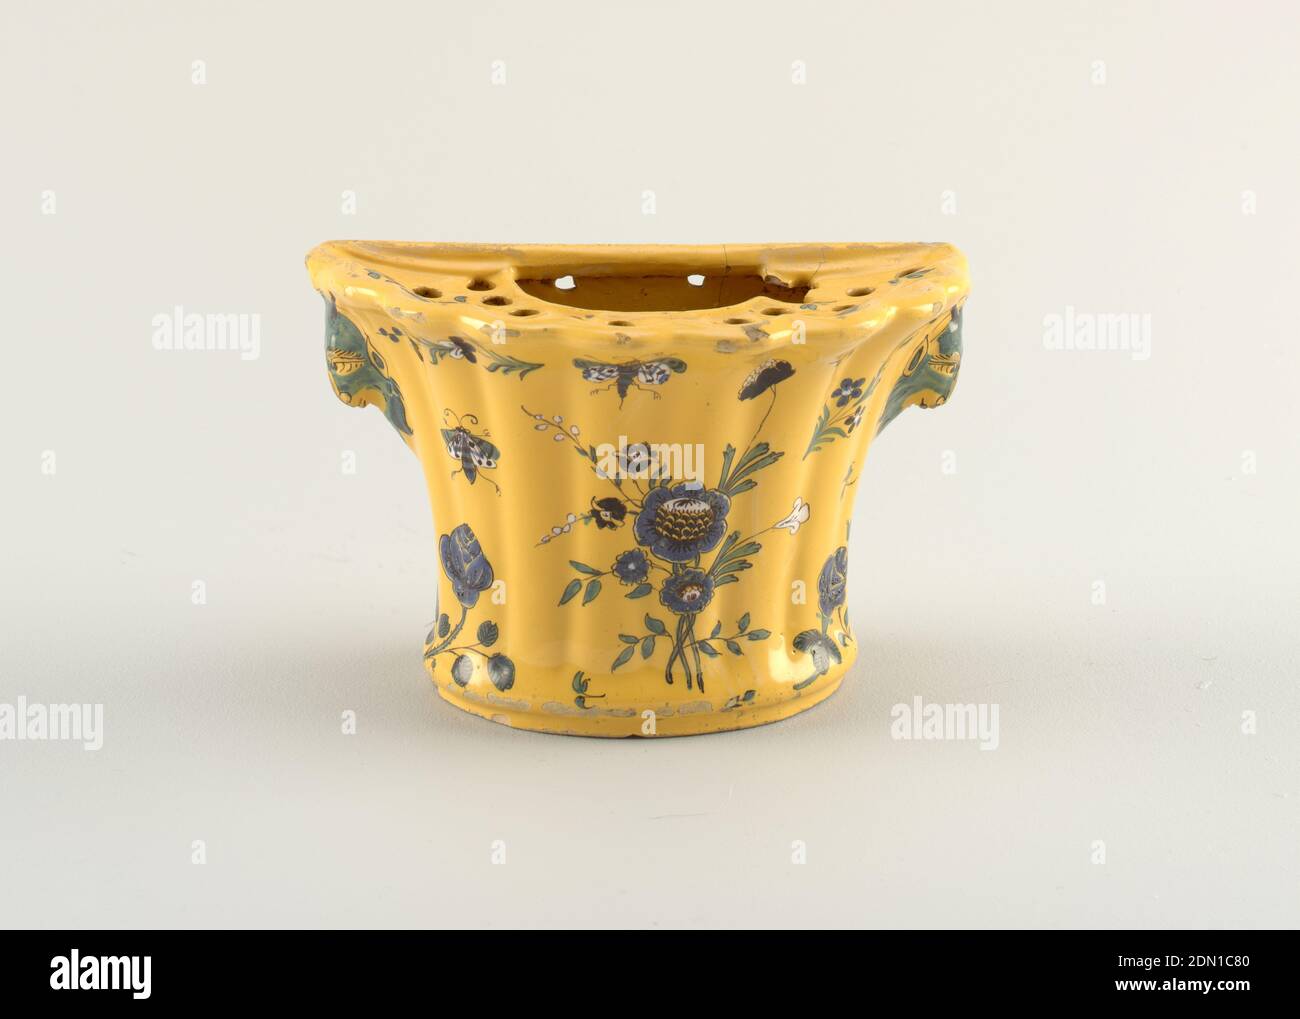 Bough pot, Molded and glazed earthenware with polychrome enamel, Flat at back, the bowed front ribbed and flaring, with two animal-head handles. Sunken top pierced with one large and many small openings. Scalloped rim. Decorated with flowers and insects in blue, green and white outlined in black, on a thick yellow ground., possibly Marseille, France, ca. 1750, ceramics, Decorative Arts, Bough pot Stock Photo